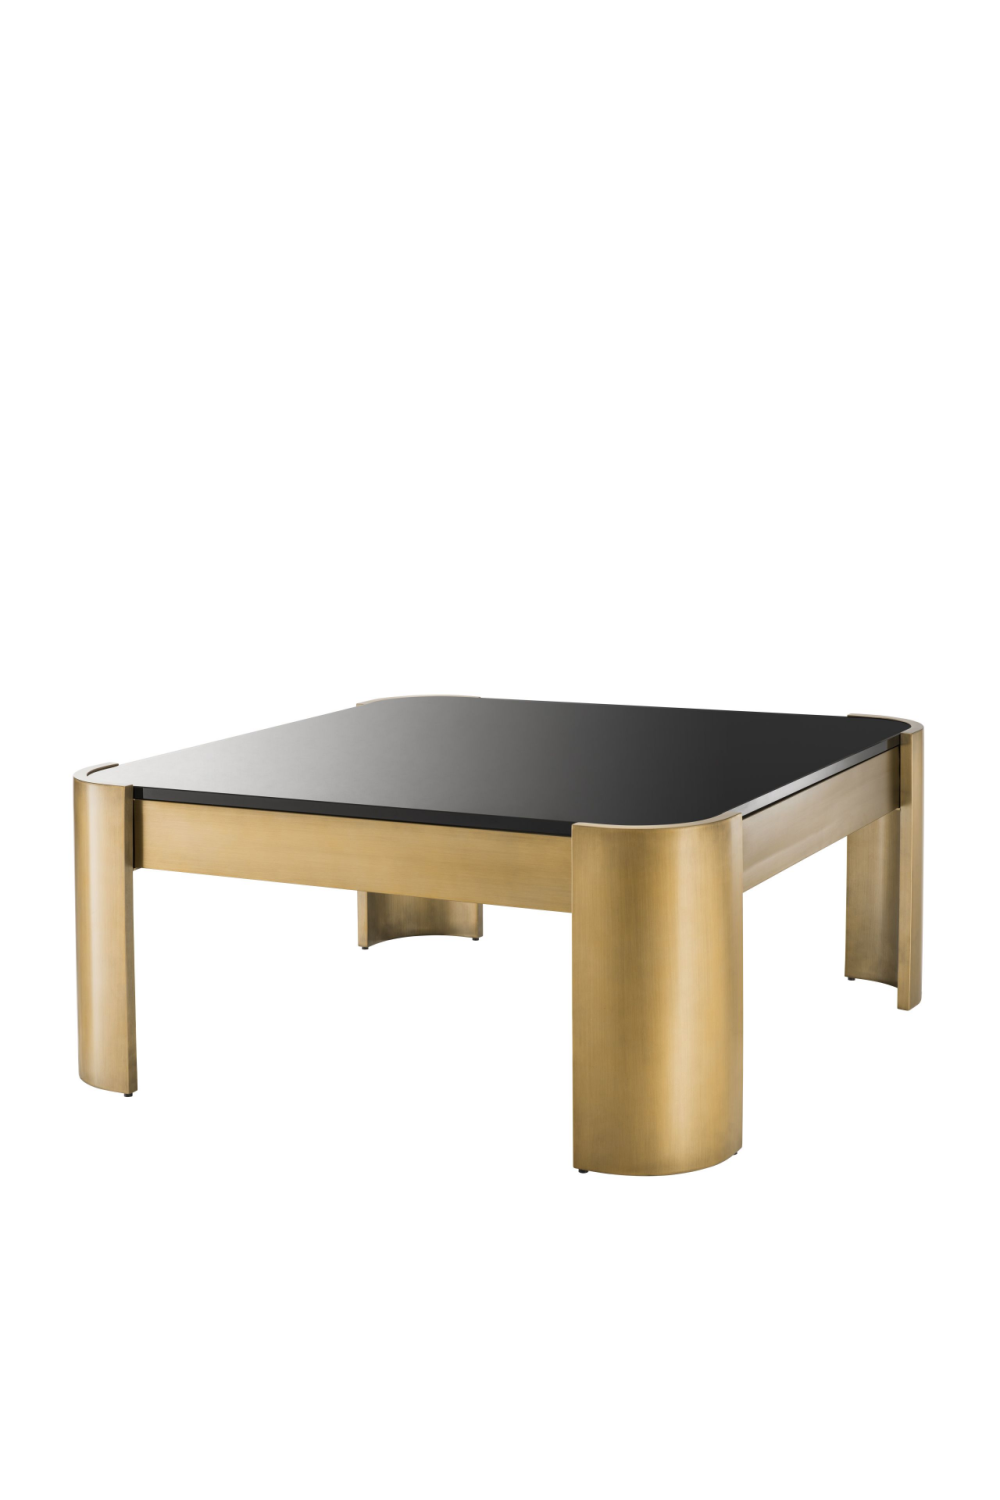 Cleo Side Table - Tall - Antique Brass